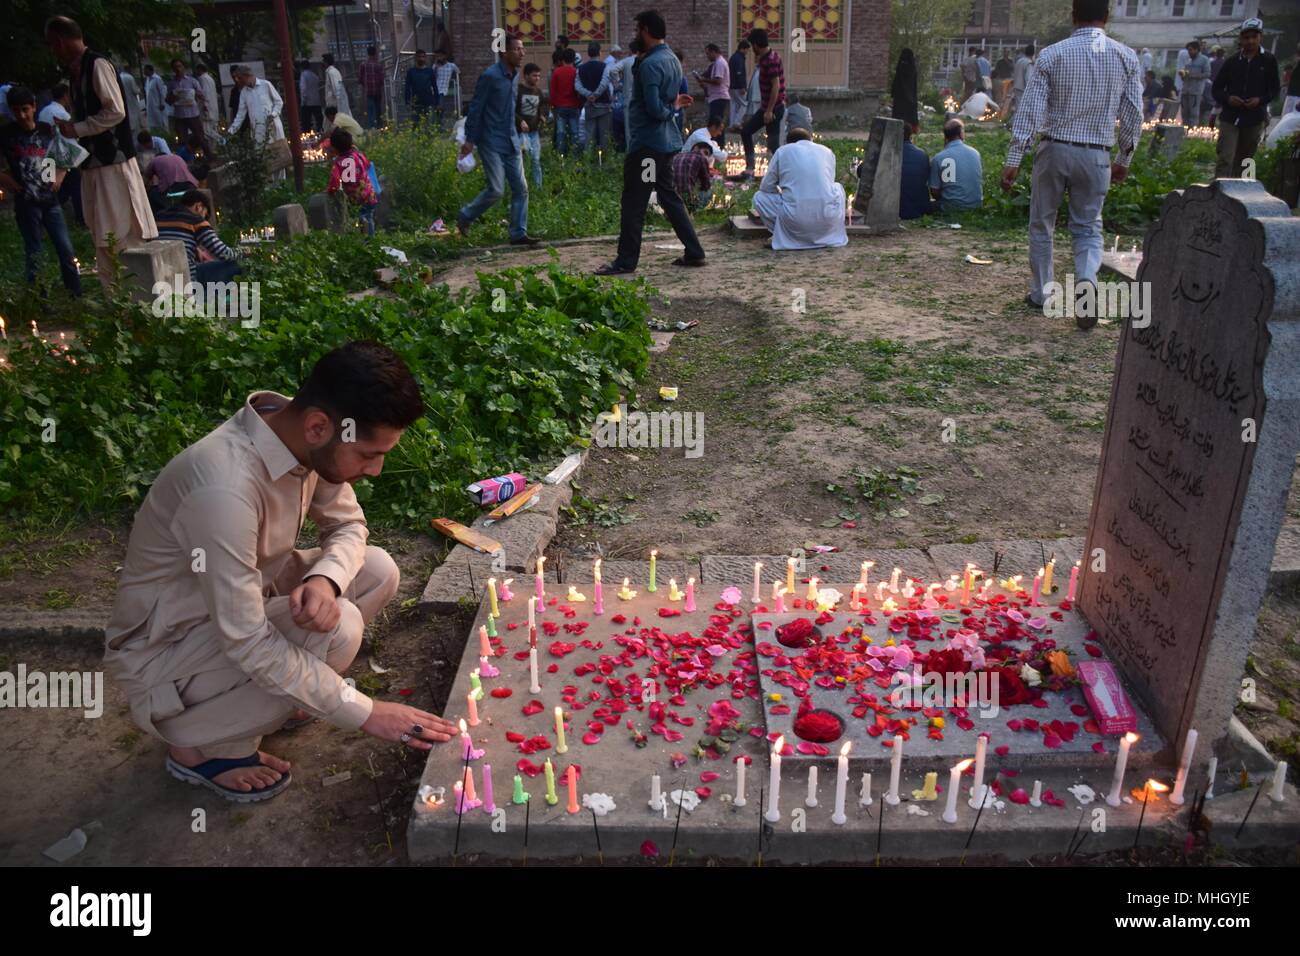 A Kashmiri Shia Muslim light candles on graves on the occasion of Shab-e-Baraat. Every year, Shab-e-Barat is observed on the night between 14th and 15th of Sha'aban, which is the eighth month of the Islamic calendar. According to Islam, Shab-e-Barat means the night of forgiveness. It is considered to be the night when Allah forgives sinners. Shab-e-Barat is also known as Bara'a Night and Mid-Sha'ban. In The Arab world, it's referred to as Laylat al-Bara'at. The festival falls in the run up to Ramadan and is considered the night when Allah forgives sinners. Stock Photo